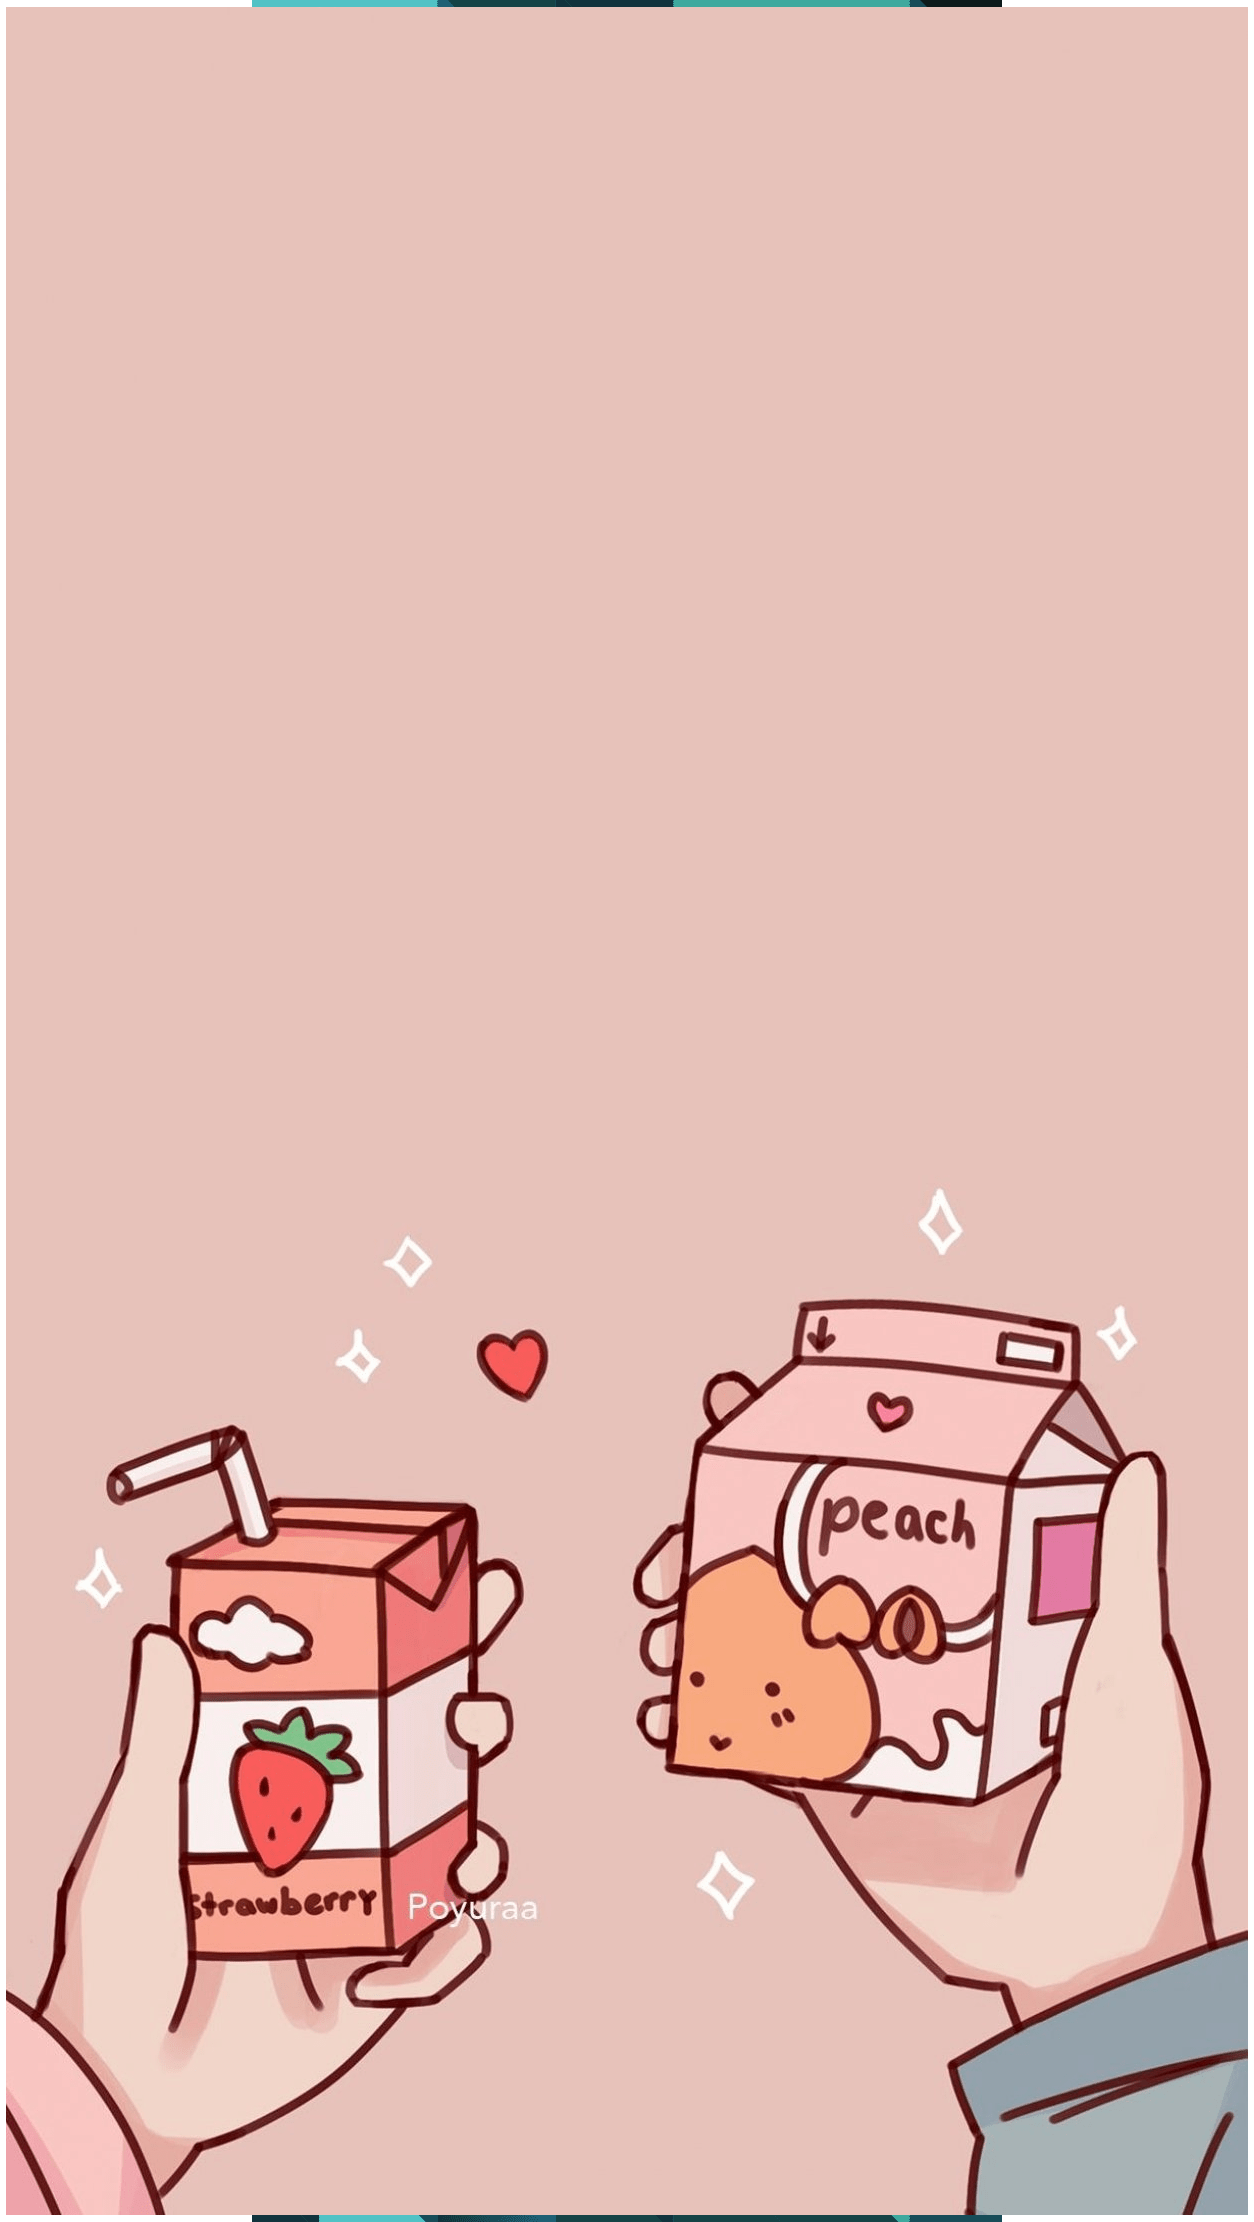 Aesthetic phone background of a person holding a strawberry milk carton and peach toast - Food